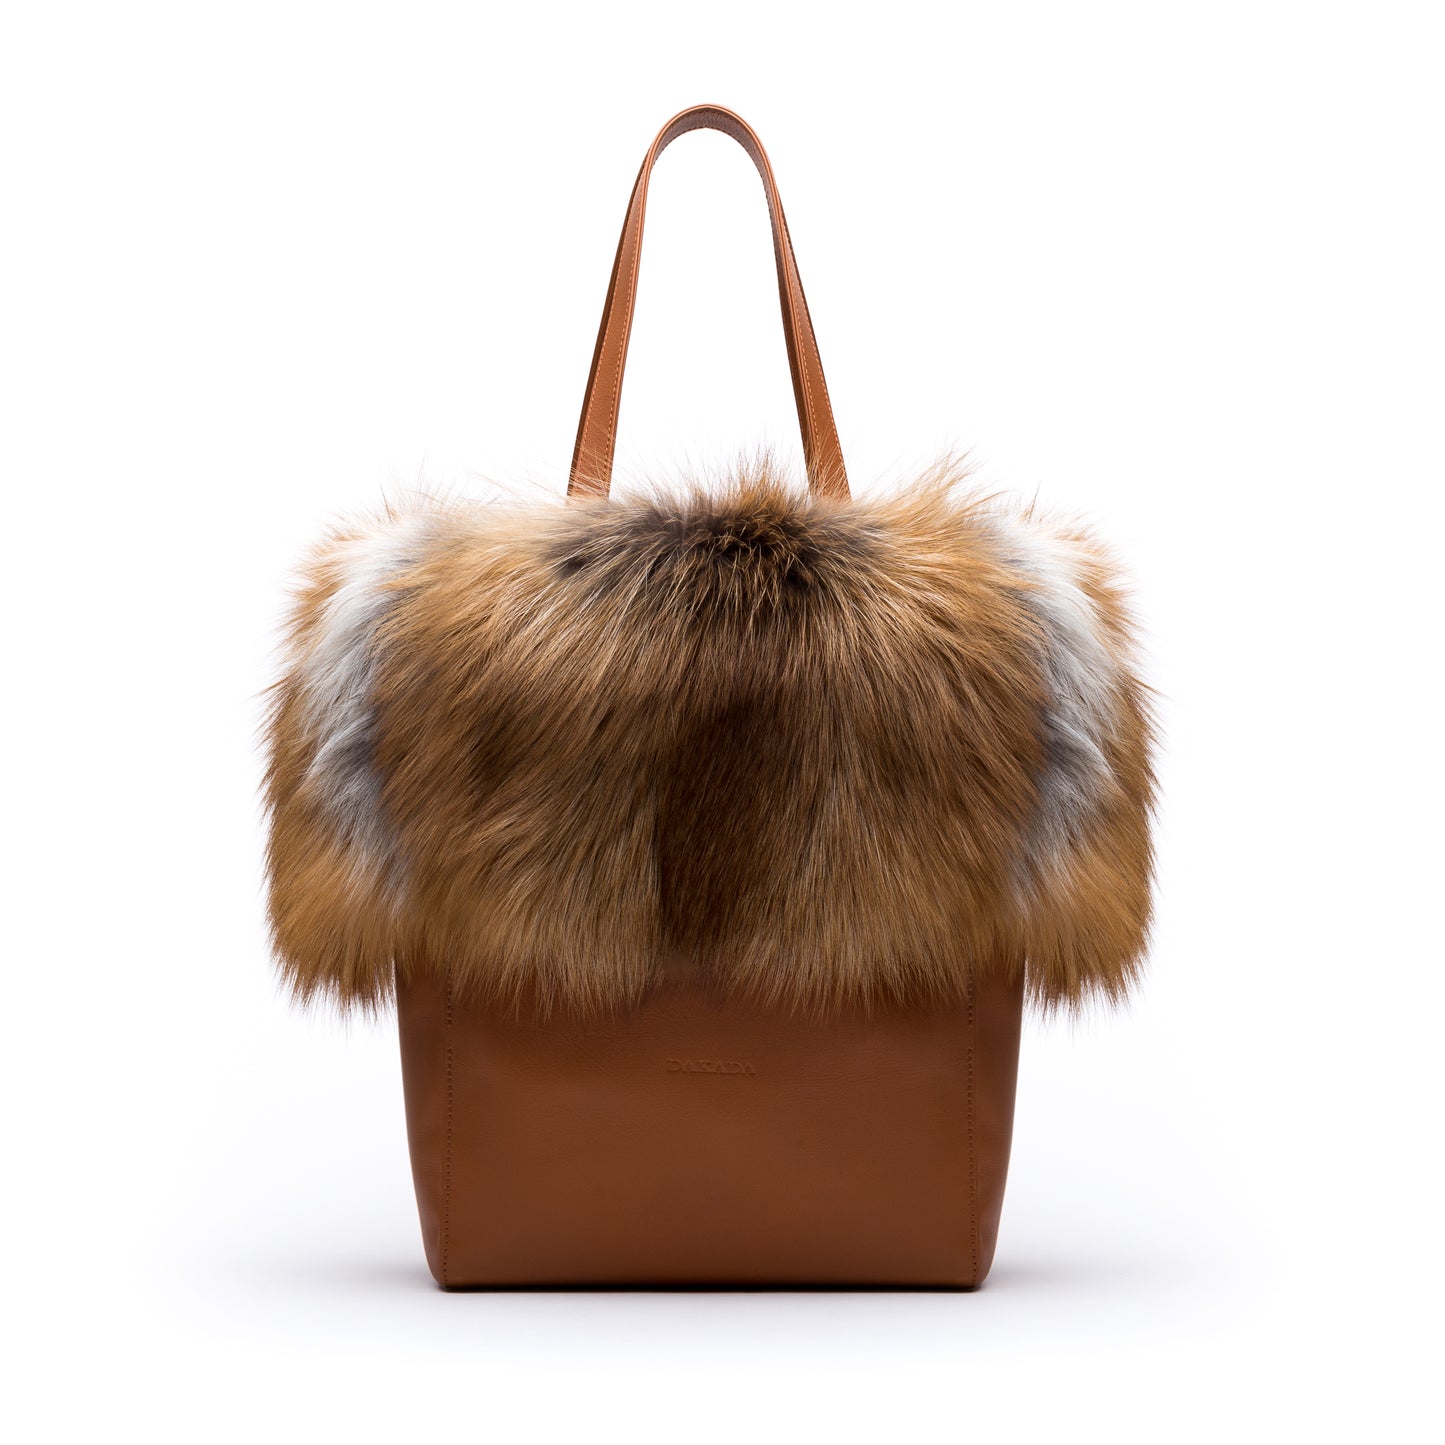 Kaley- Camel Leather Tote with Red Fox